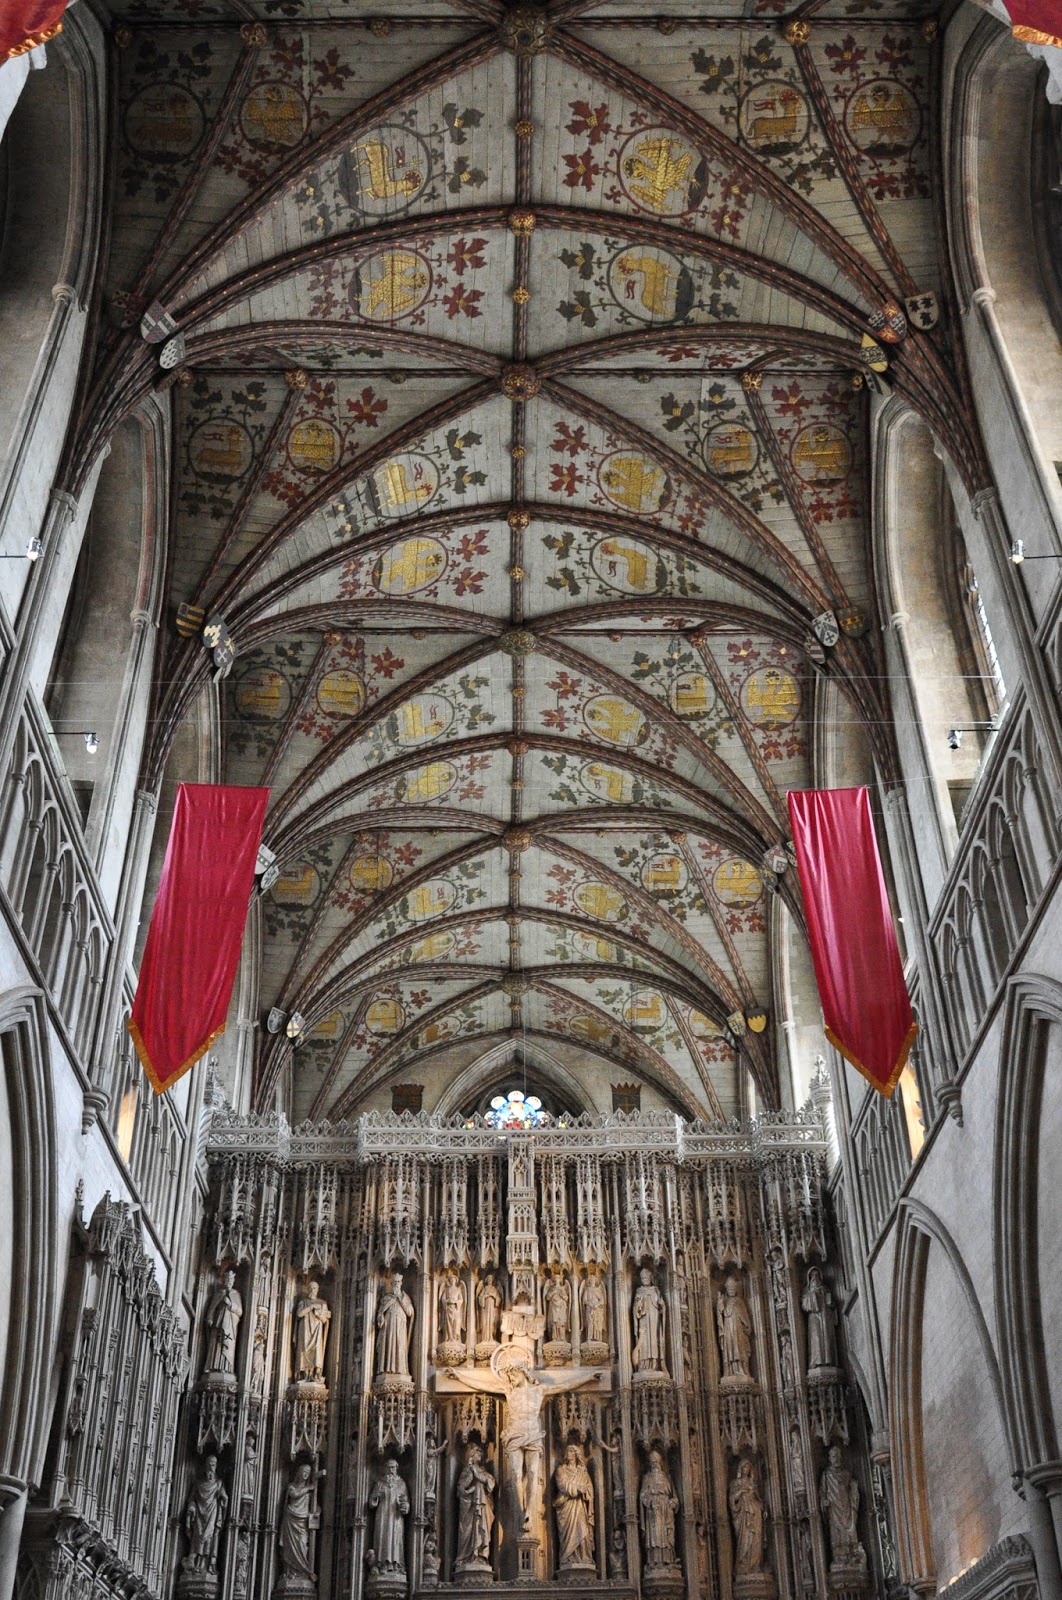 Inside St. Albans Cathedral, St. Albans, Herts, England